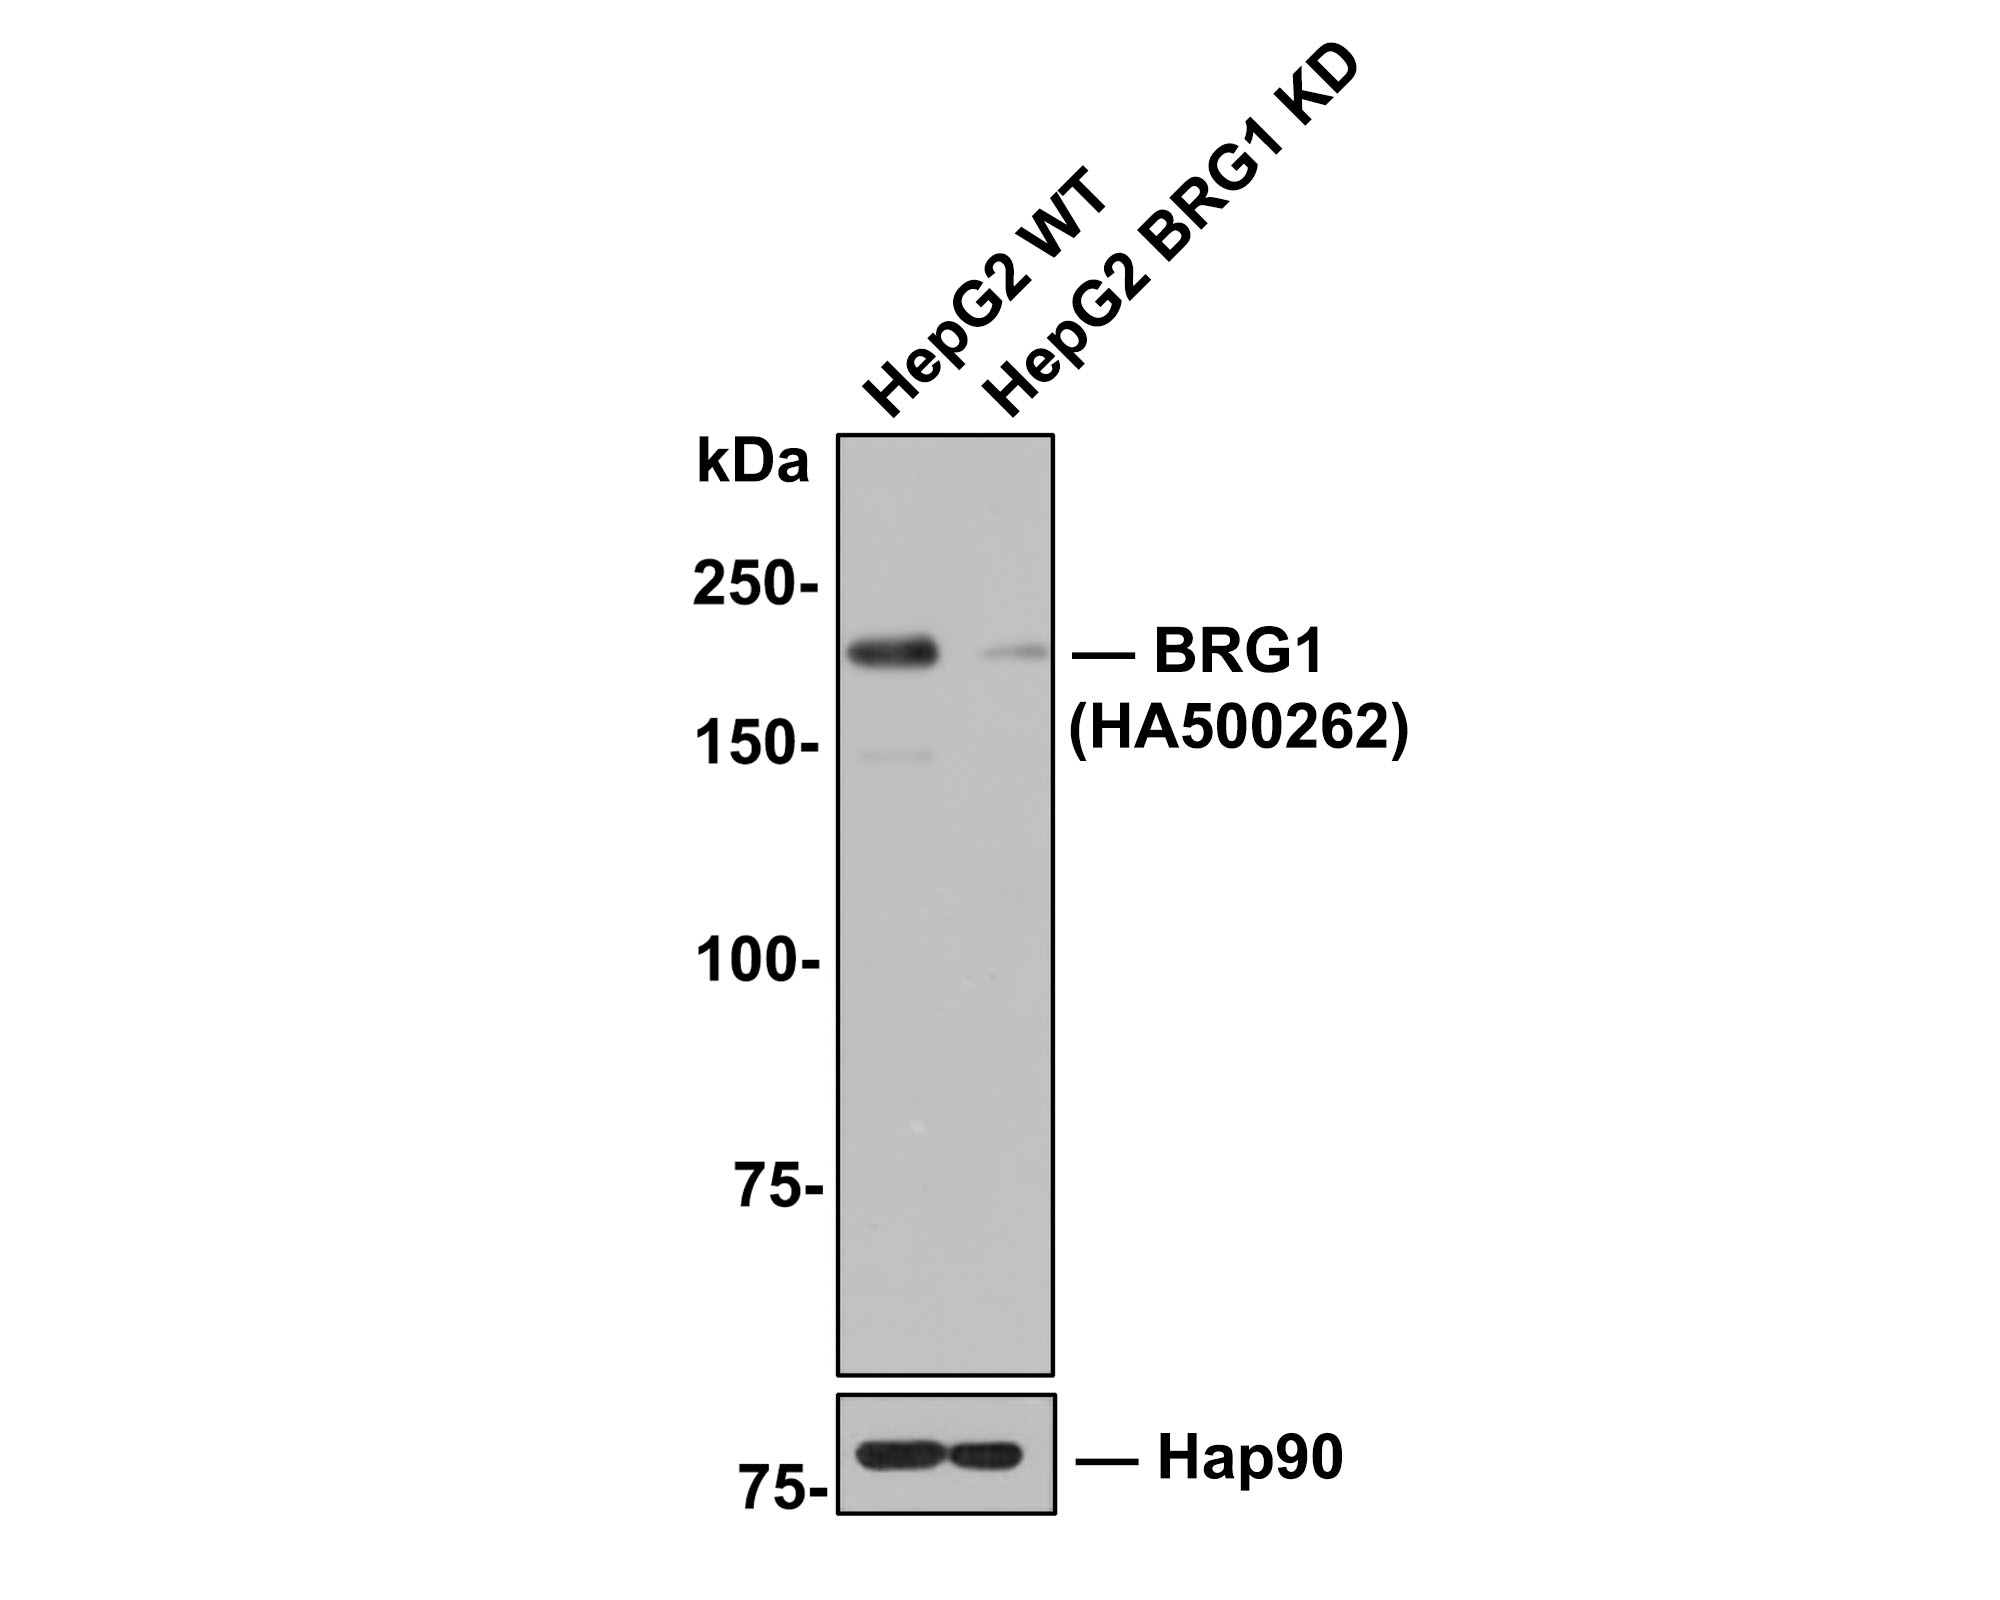 All lanes: Western blot analysis of BRG1 with anti-BRG1 antibody (HA500262) at 1:500 dilution.<br />
Lane 1: Wild-type HepG2 whole cell lysate (10 µg).<br />
Lane 2: BRG1 knockdown HepG2 whole cell lysate (10 µg).<br />
<br />
HA500262 was shown to specifically react with BRG1 in wild-type HepG2 cells. Weakened band was observed when BRG1 knockdown sample was tested. Wild-type and BRG1 knockdown samples were subjected to SDS-PAGE. Proteins were transferred to a PVDF membrane and blocked with 5% NFDM in TBST for 1 hour at room temperature. The primary antibody (HA500262, 1:500) was used in 5% BSA at room temperature for 2 hours. Goat Anti-Rabbit IgG-HRP Secondary Antibody (HA1001) at 1:300,000 dilution was used for 1 hour at room temperature.